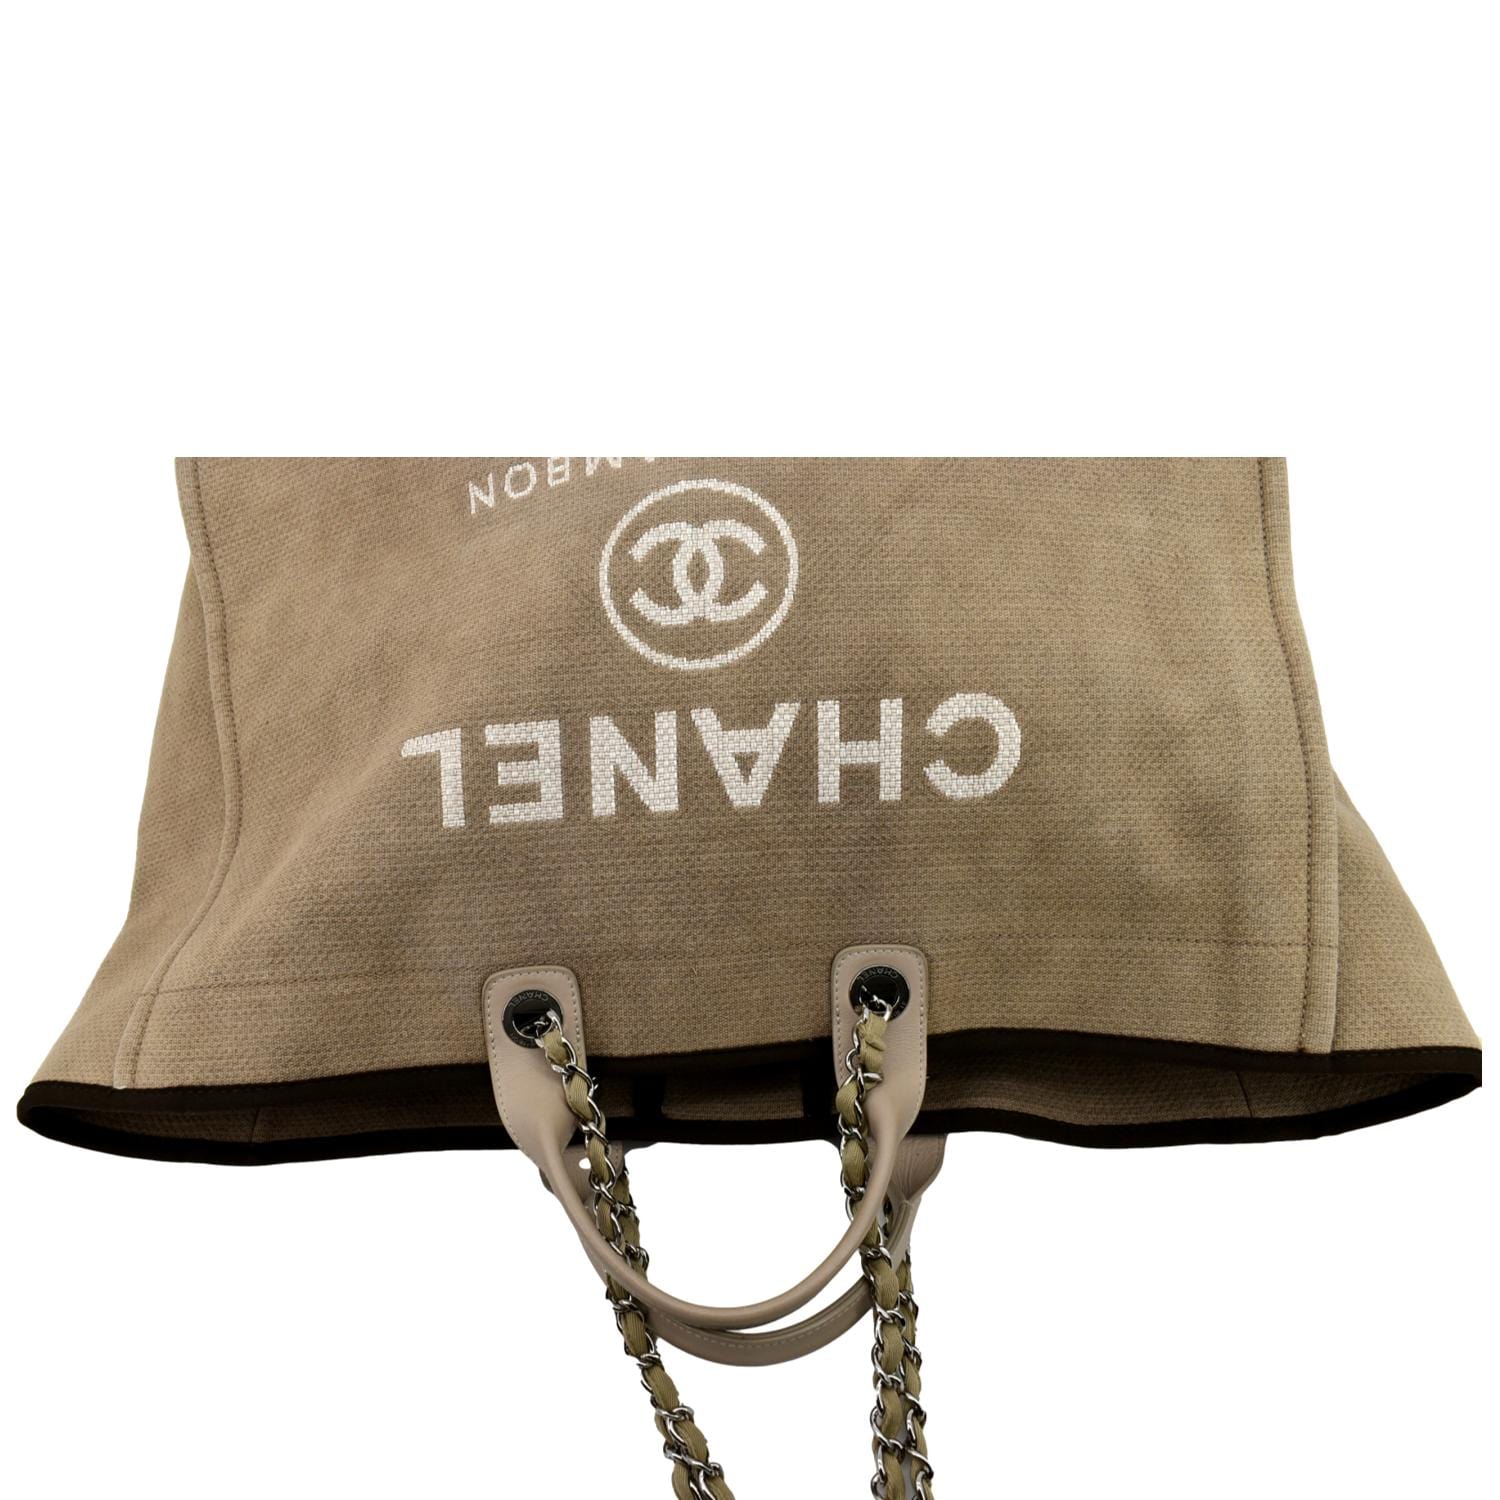 Chanel Deauville Canvas Tote Bag For Sale at 1stDibs